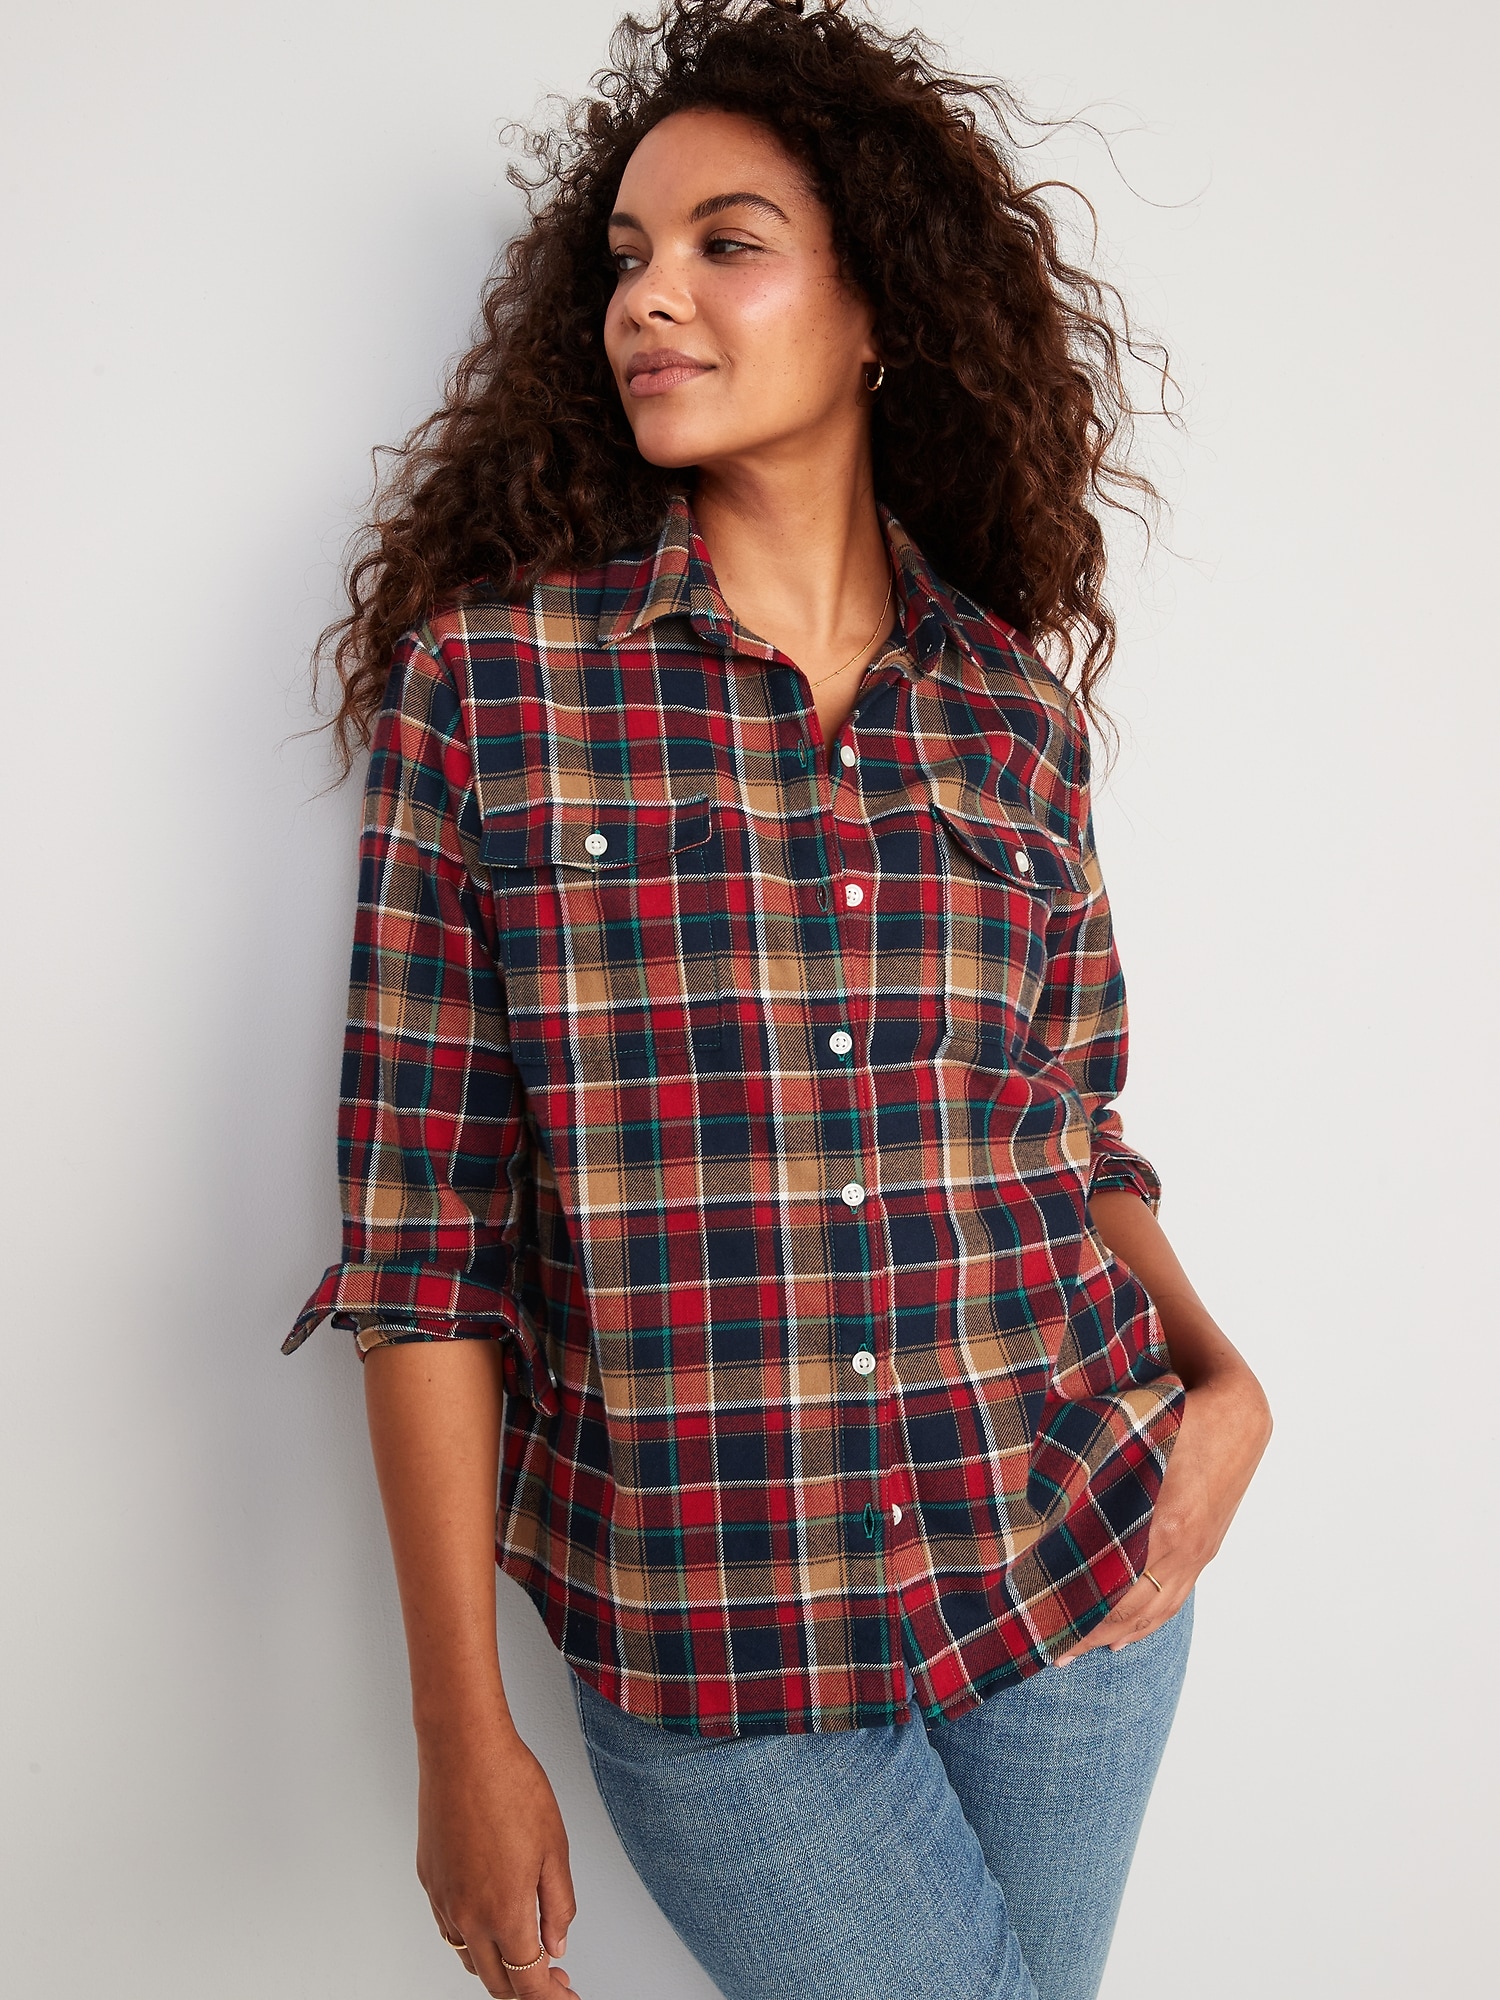 Old Navy Long-Sleeve Plaid Flannel Boyfriend Tunic Shirt for Women brown. 1